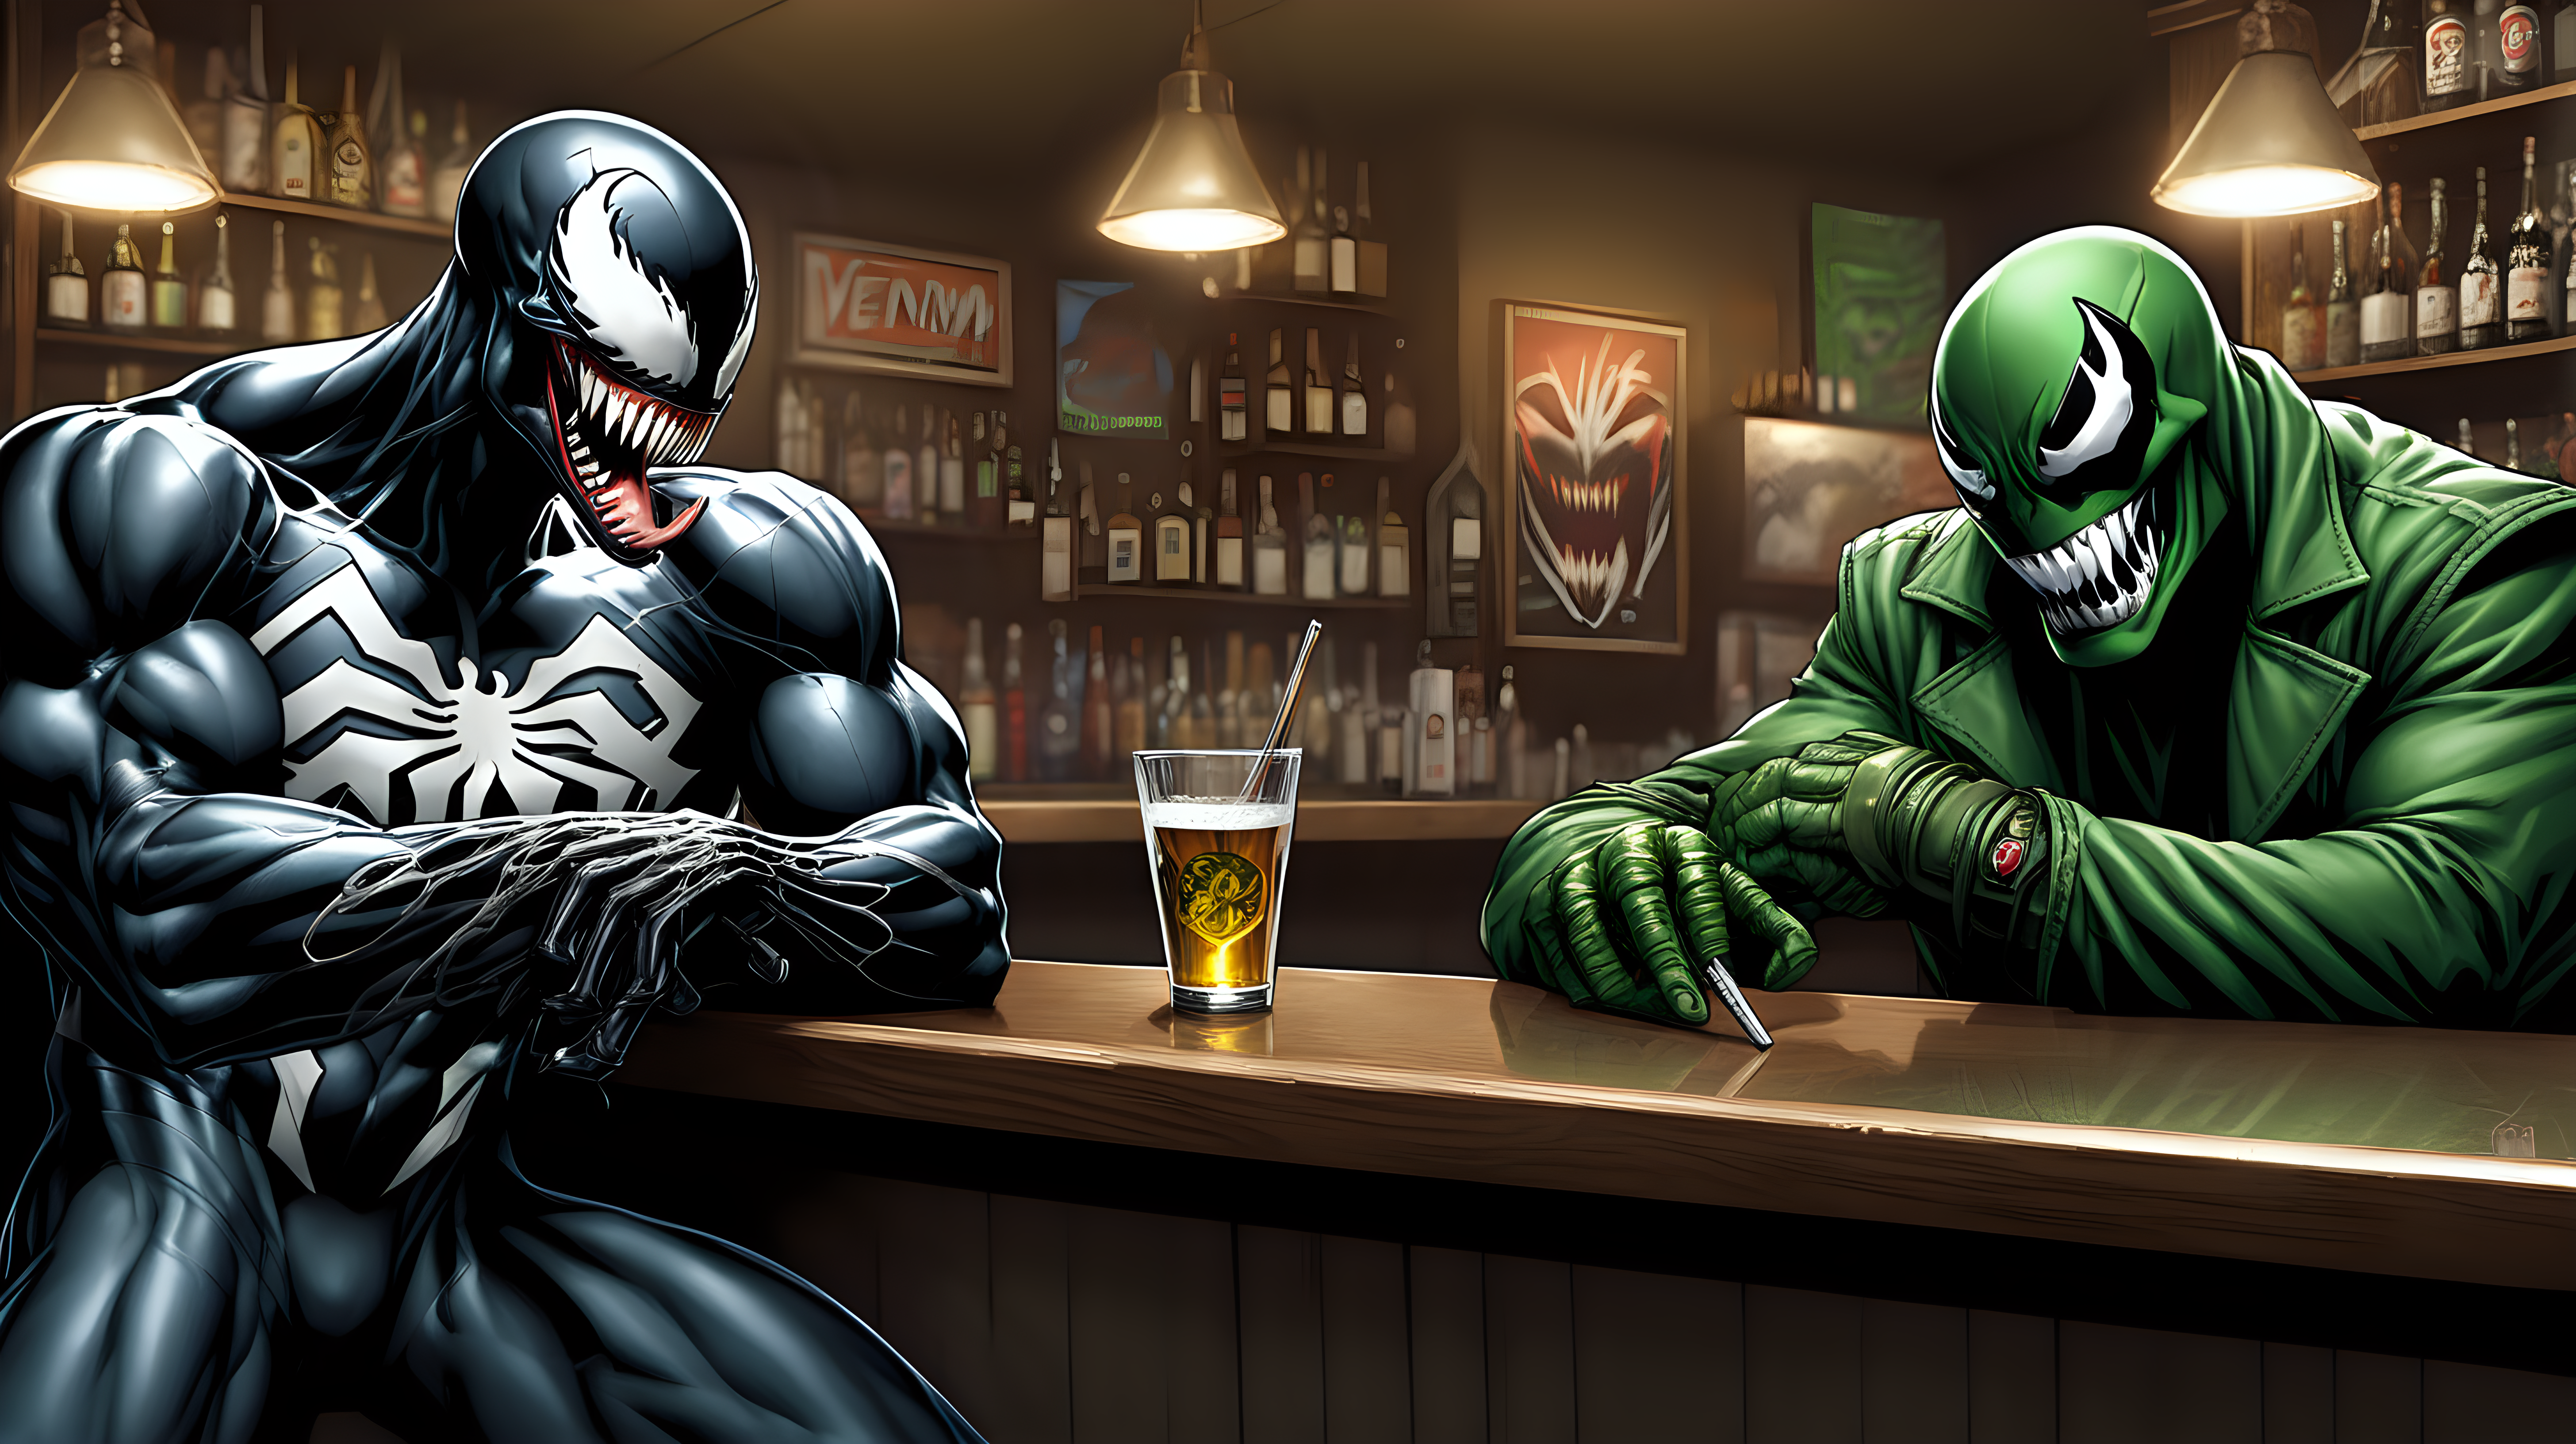 Venom a joint at a bar with Dr Doom